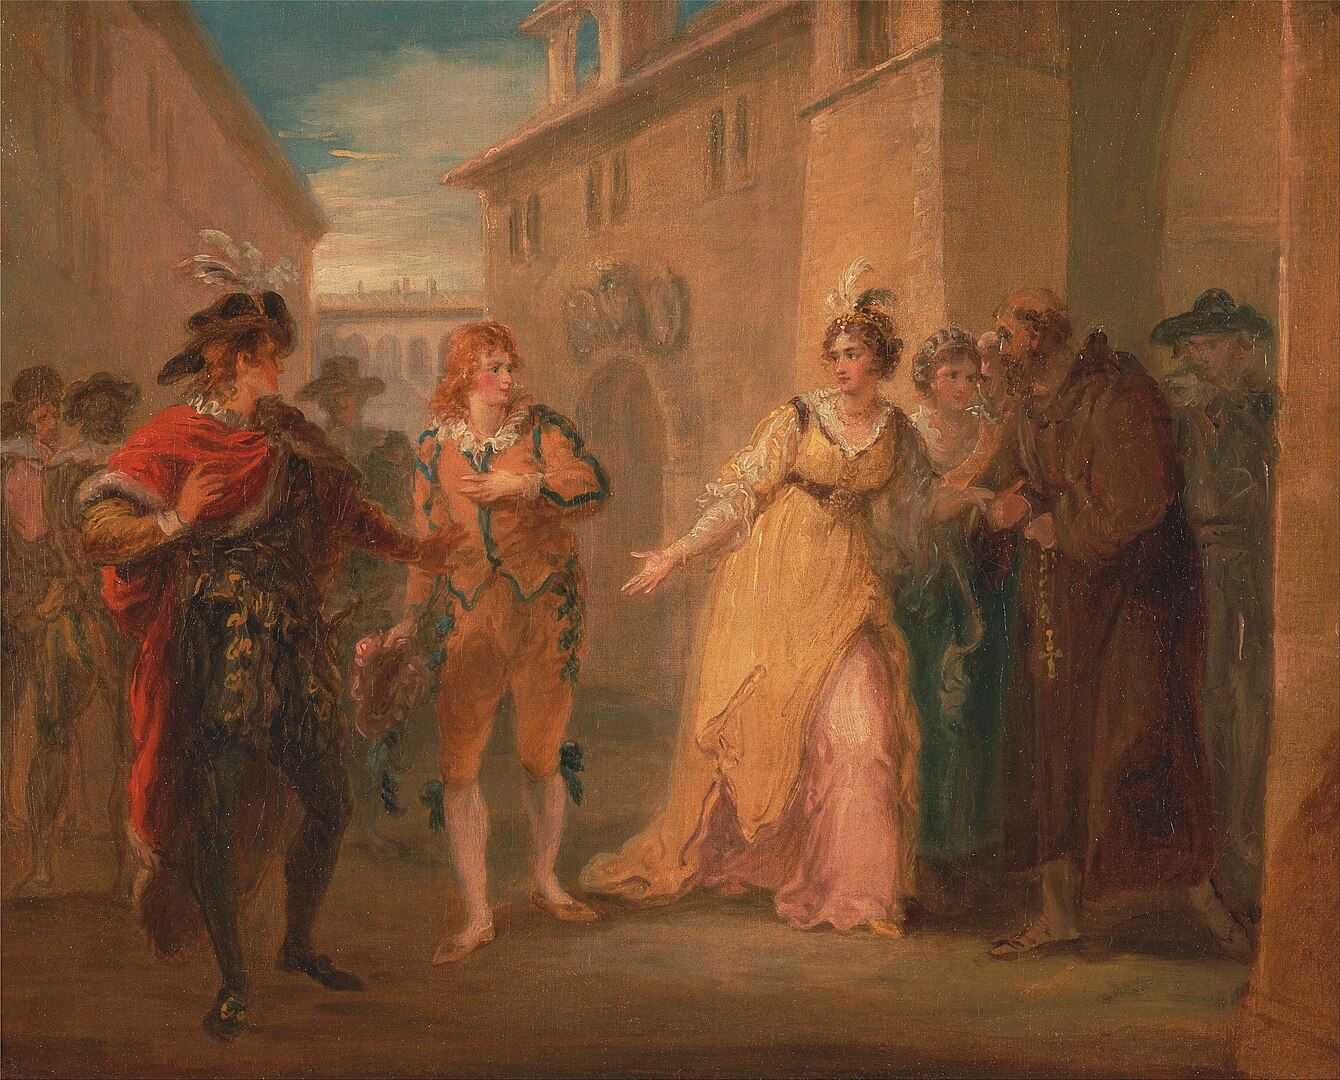 A scene depicting two groups of people standing towards each other in a corridor.